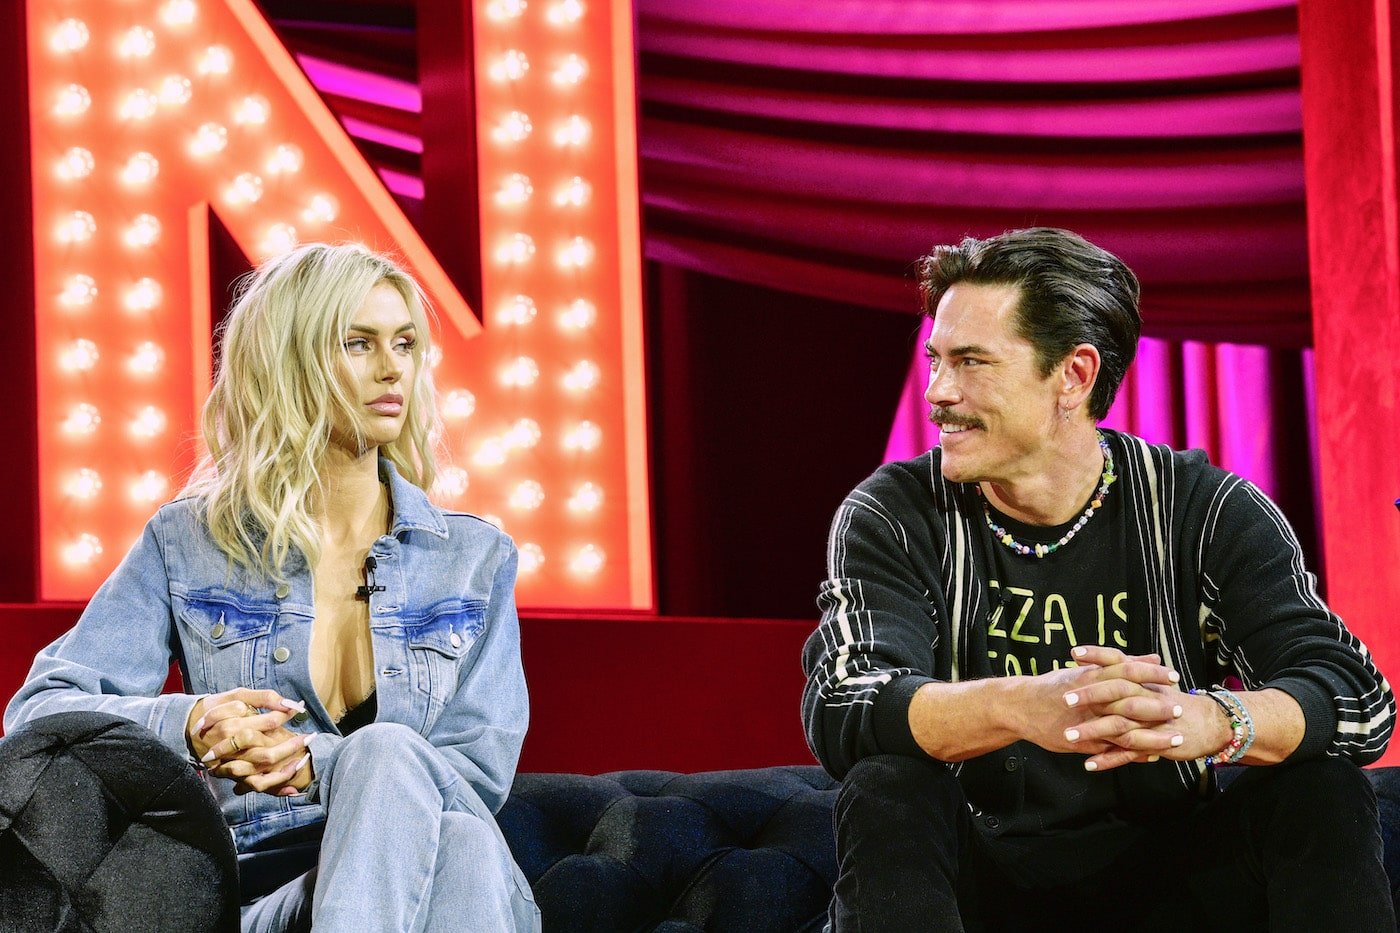 Lala Kent looks at Tom Sandoval from 'Vanderpump Rules' while they sit on a couch at BravoCon